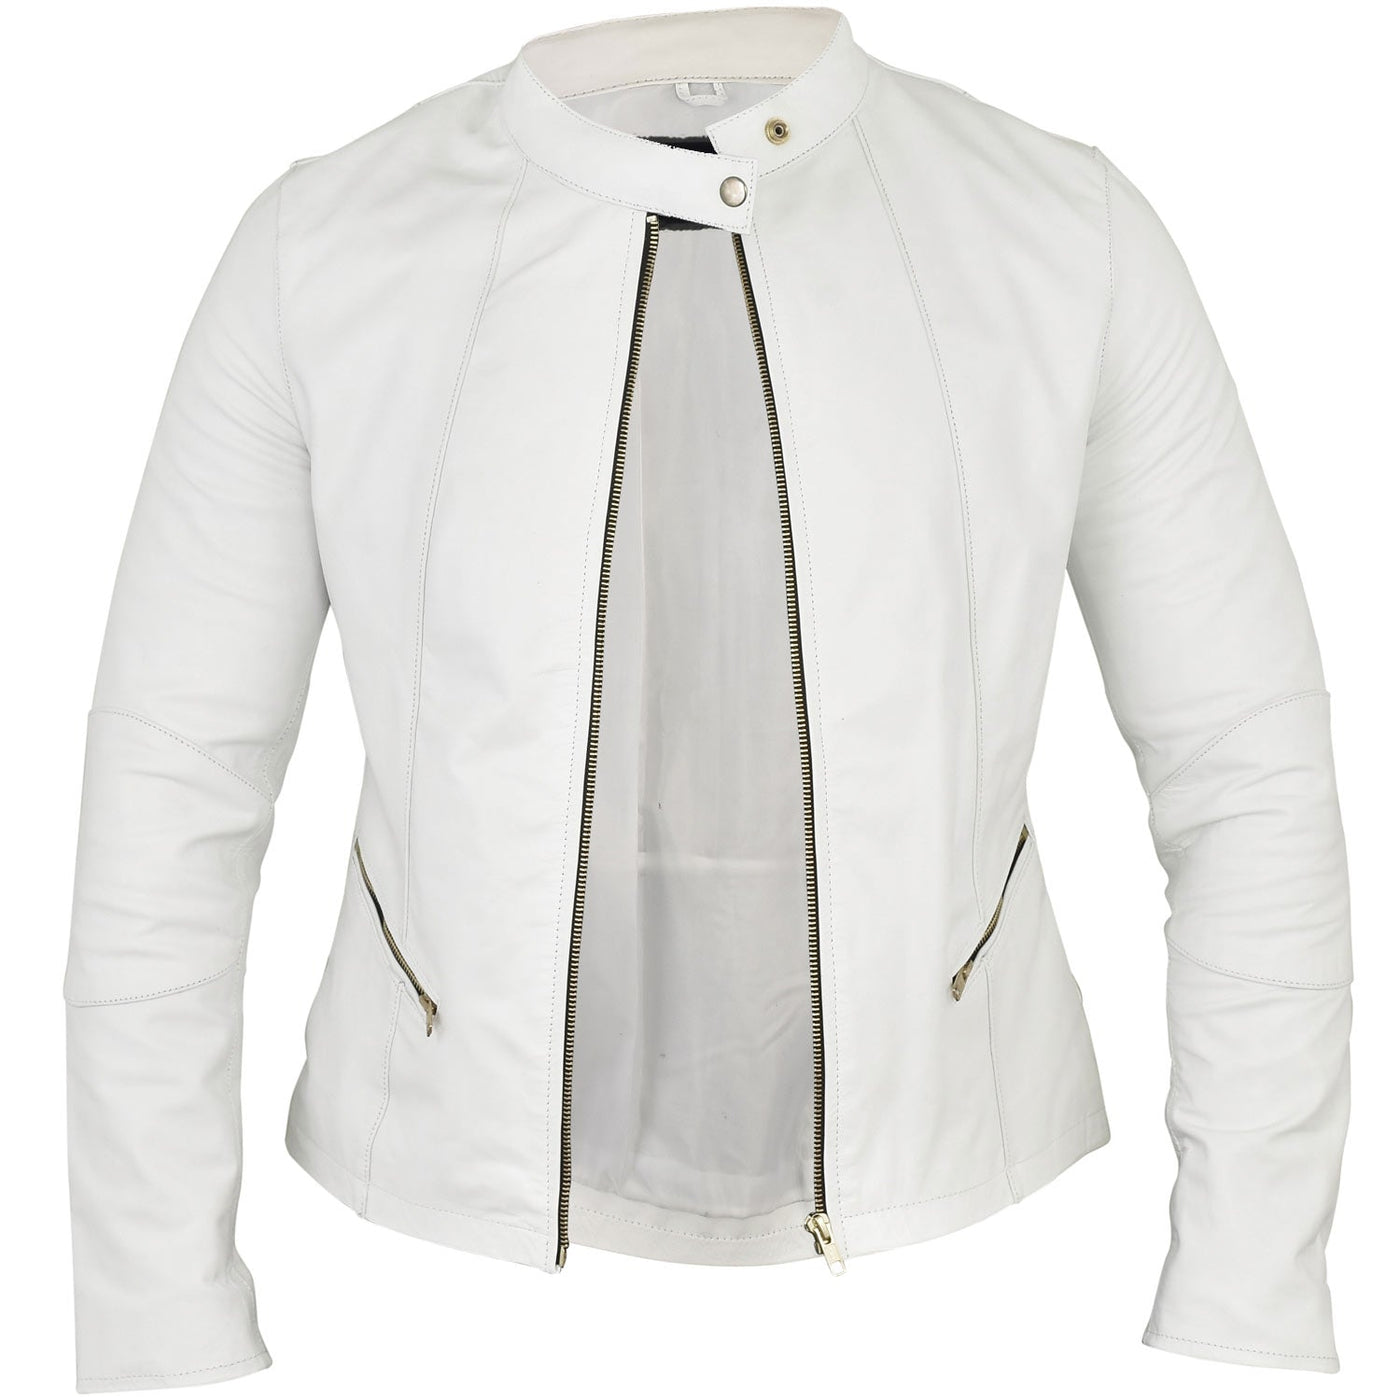 Sophia White Leather Jacket with Gold Hardware Open Front